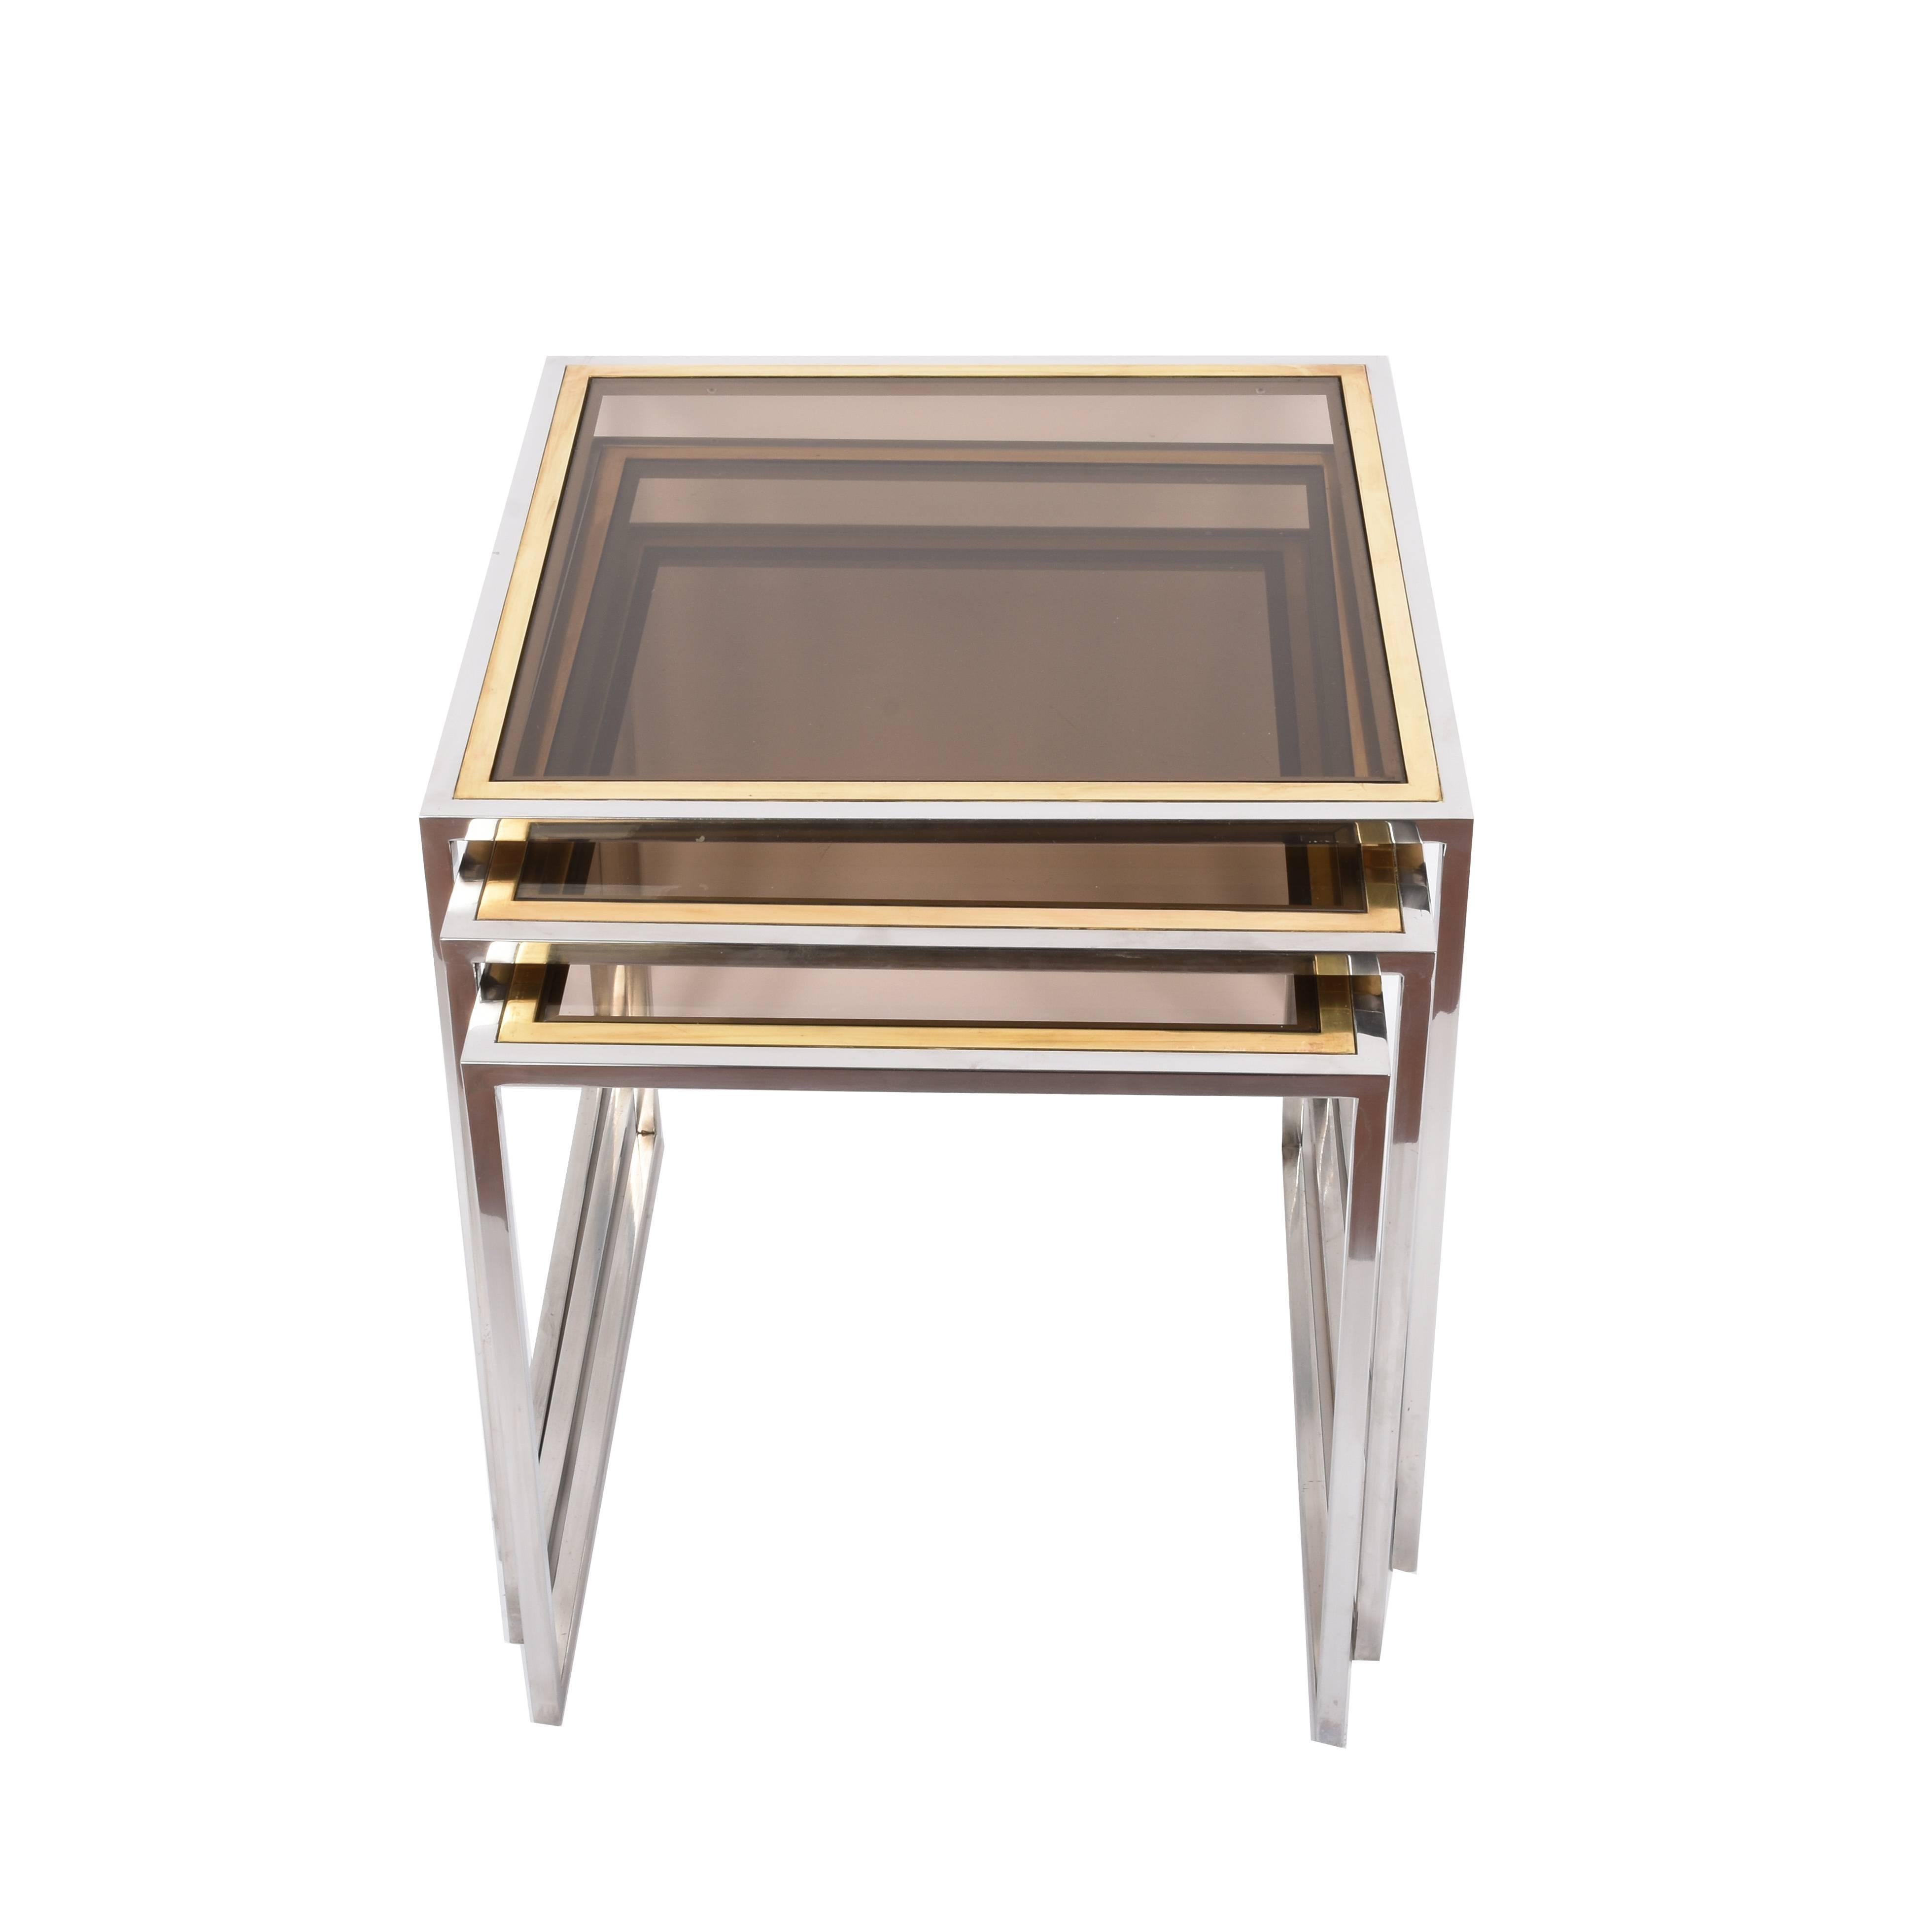 Wonderful set of three nesting tables in chromed metal, brass and smoked glass.

These Mid-Century Modern amazing tables were produced in Italy during the 1970s. 

This set, both elegant and functional, is perfect for a midcentury living